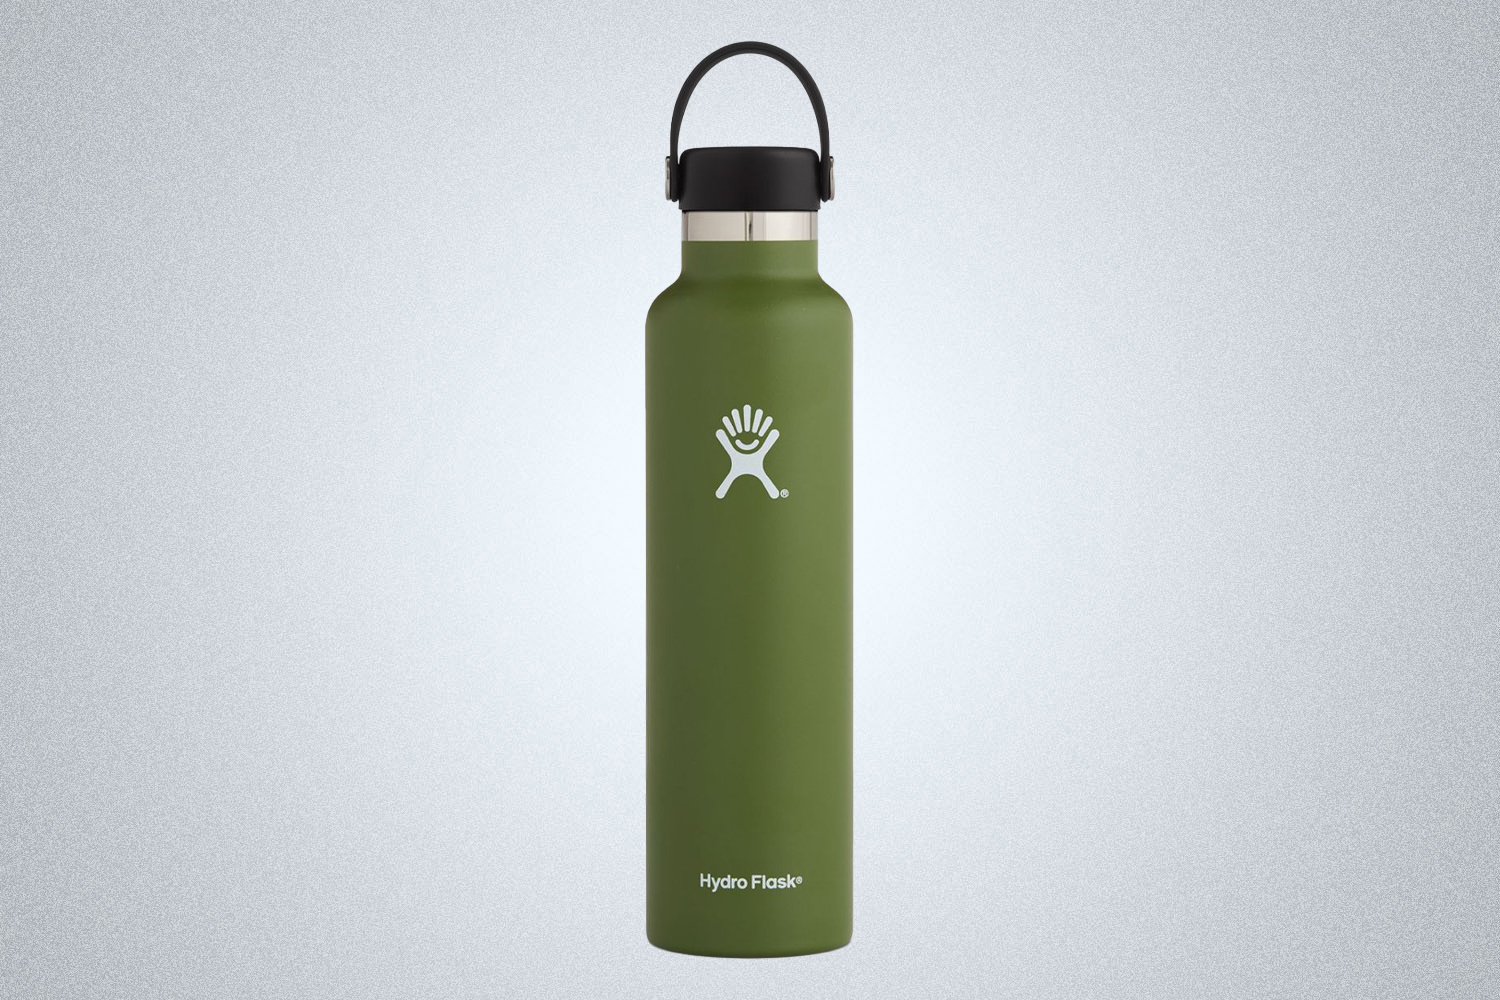 The Hydro Flask Standard Mouth Water Bottle in green is small and durable enough for workouts and fitness